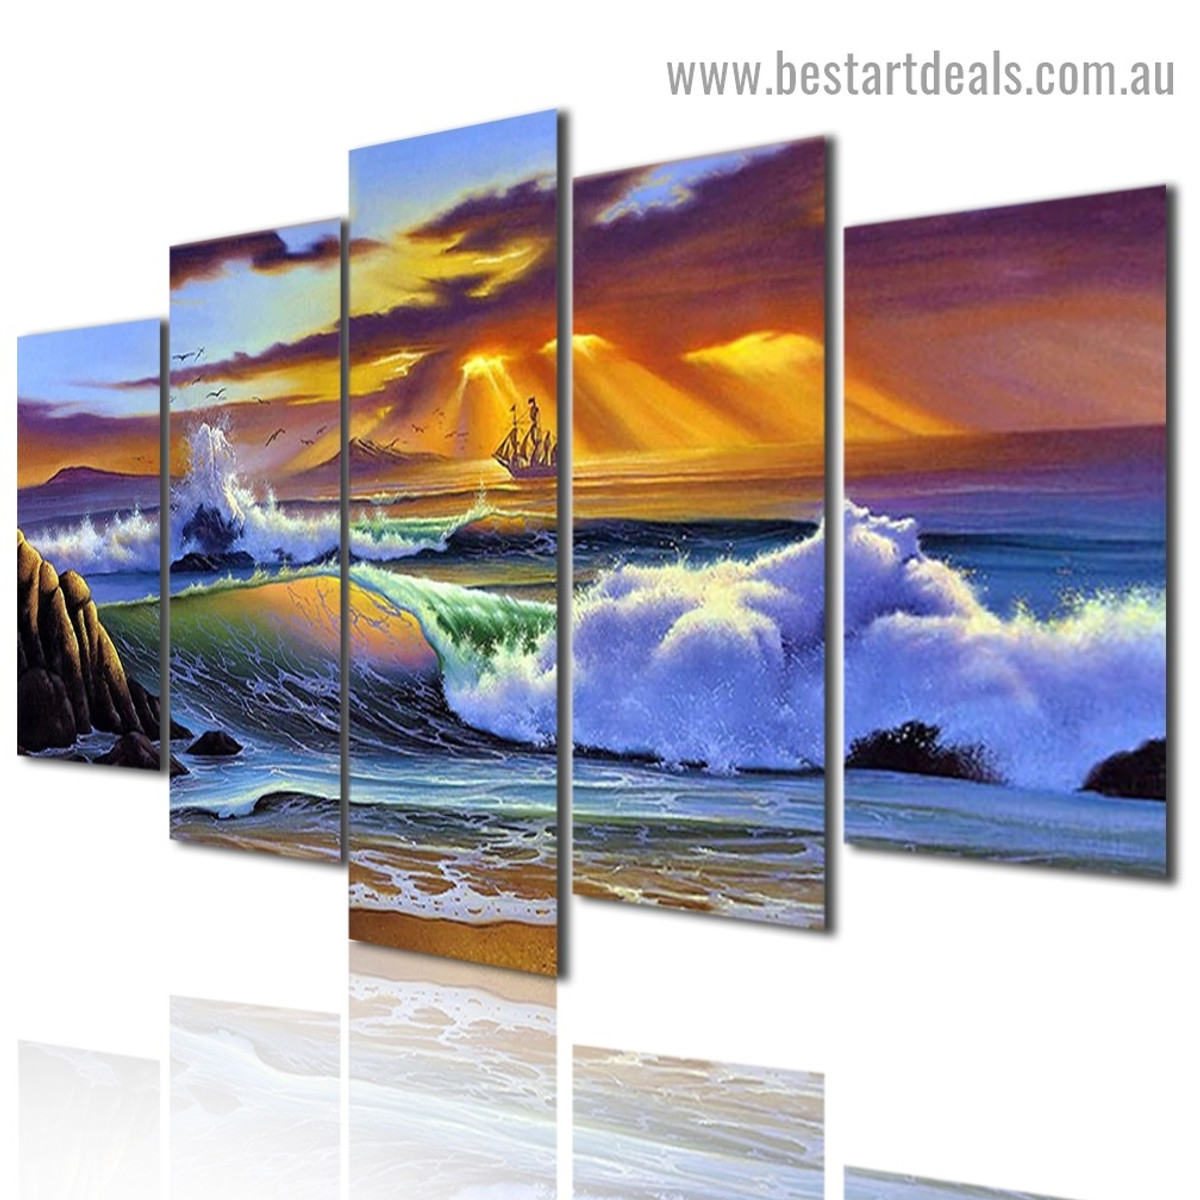 Sunset Ocean Waves Seascape Modern Artwork Image Canvas Print for Room Wall Adornment